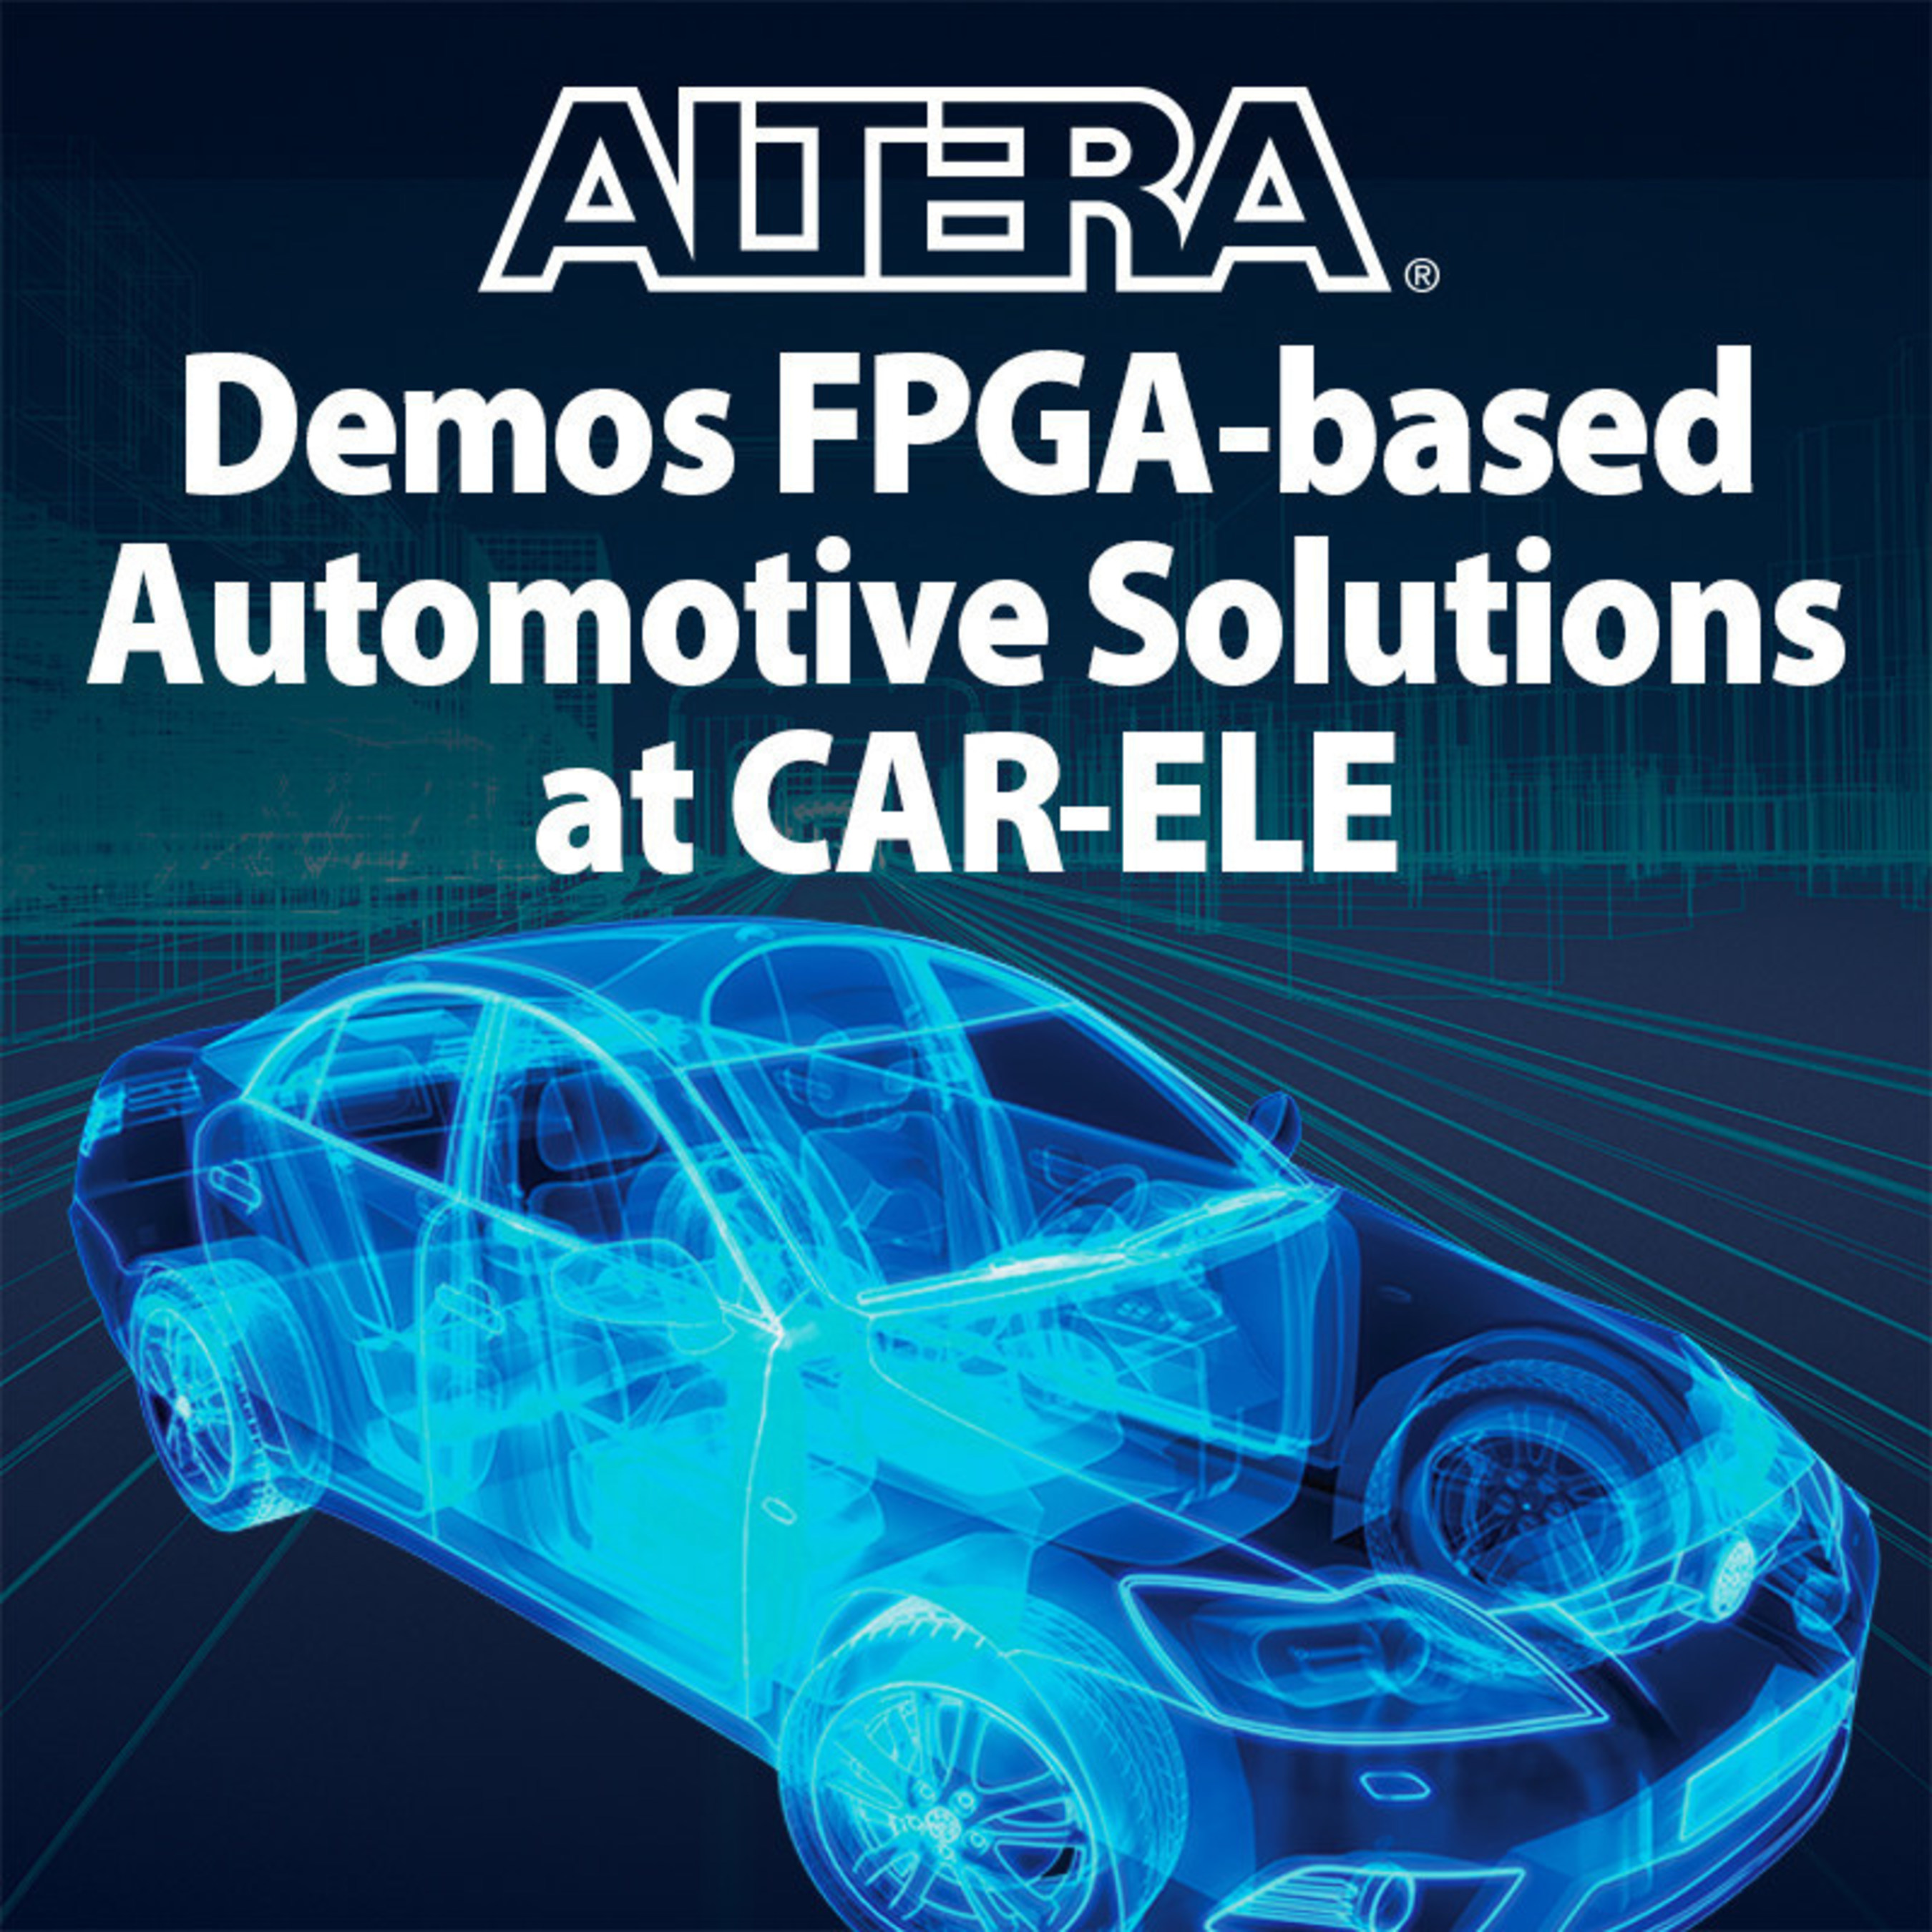 Demonstrations include solutions for ADAS, electric vehicle powertrain and infotainment systems. Booth West 8-49.